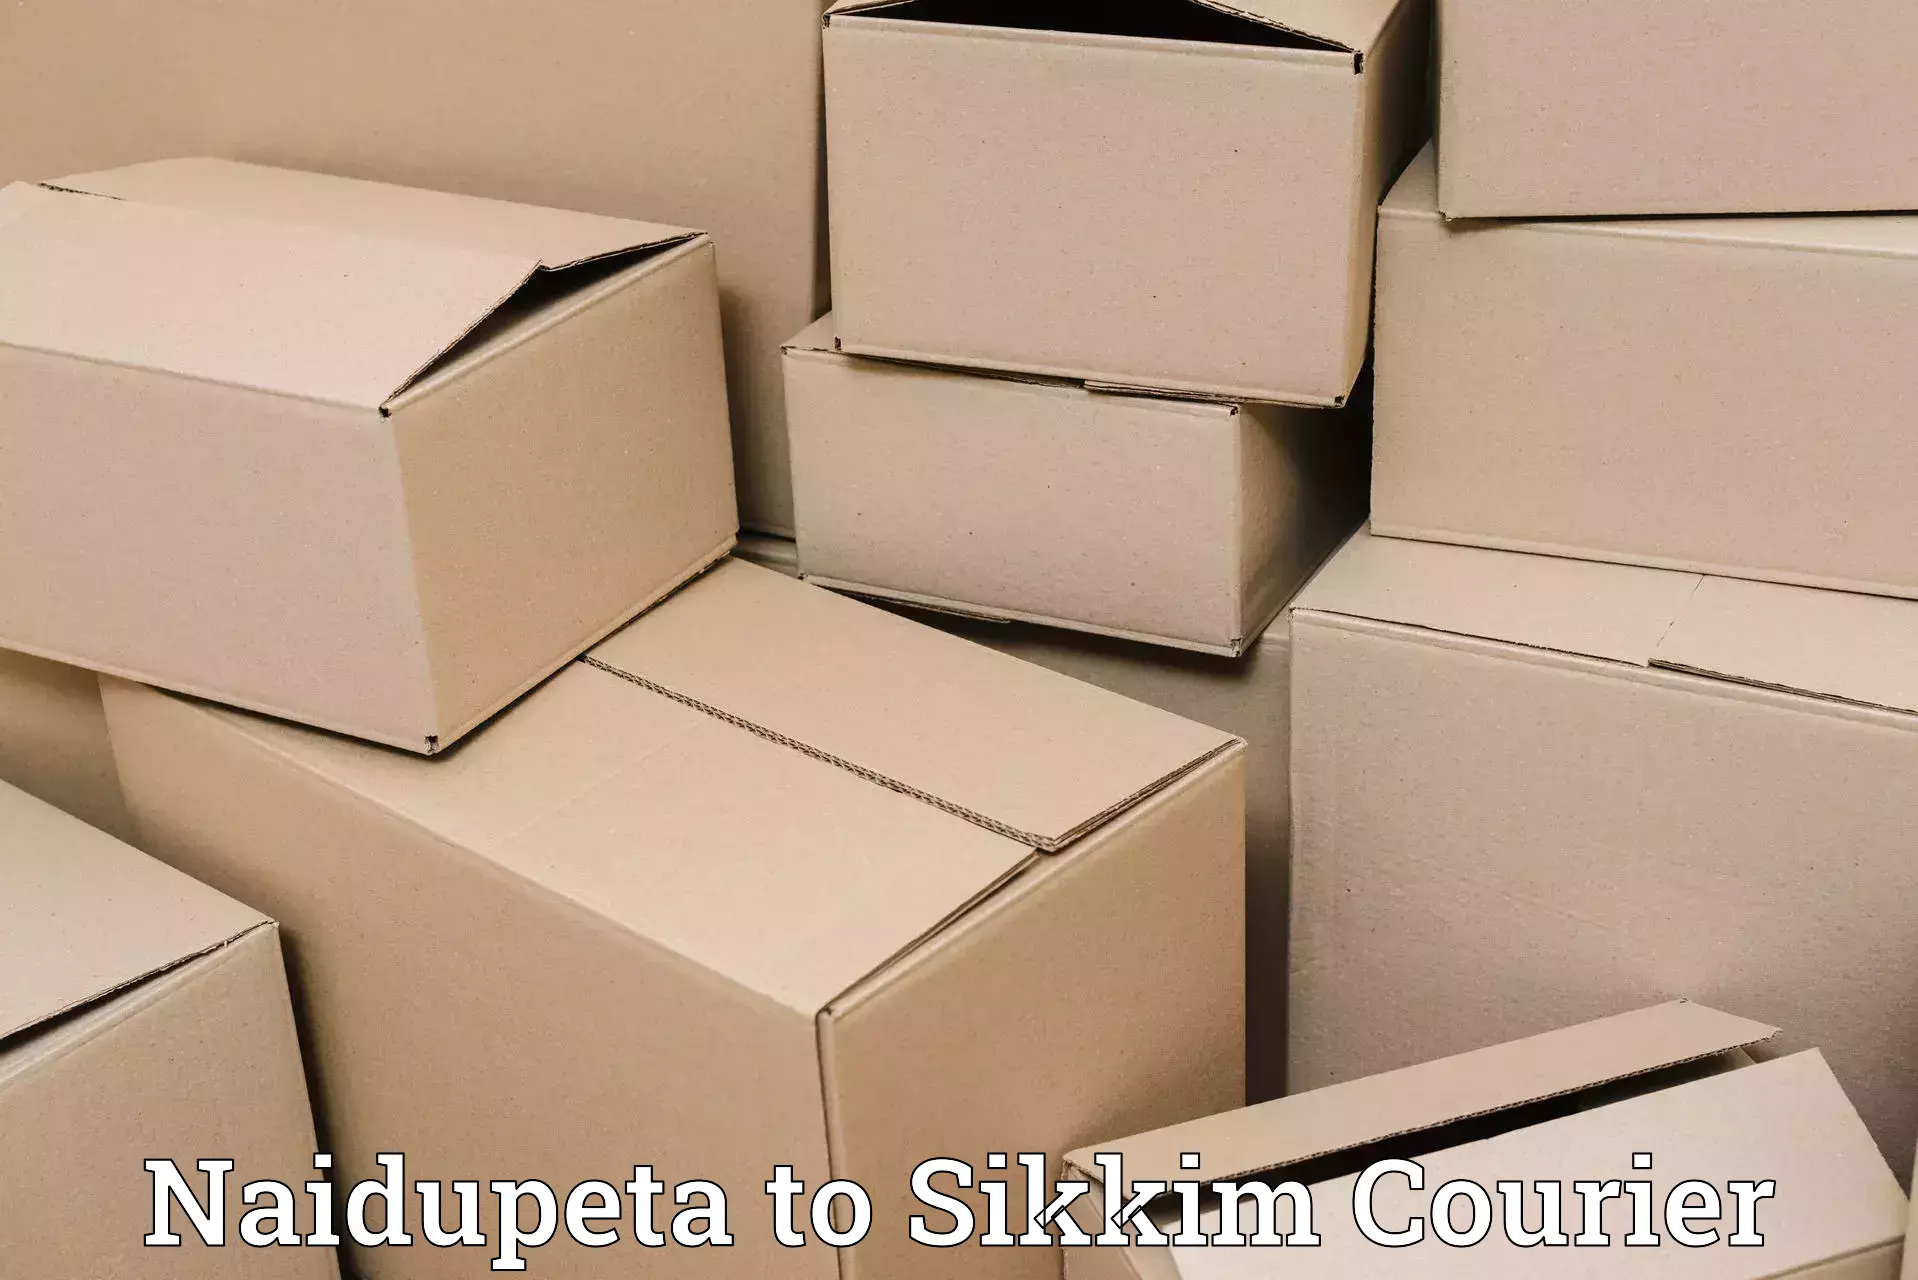 Sustainable shipping practices Naidupeta to Sikkim